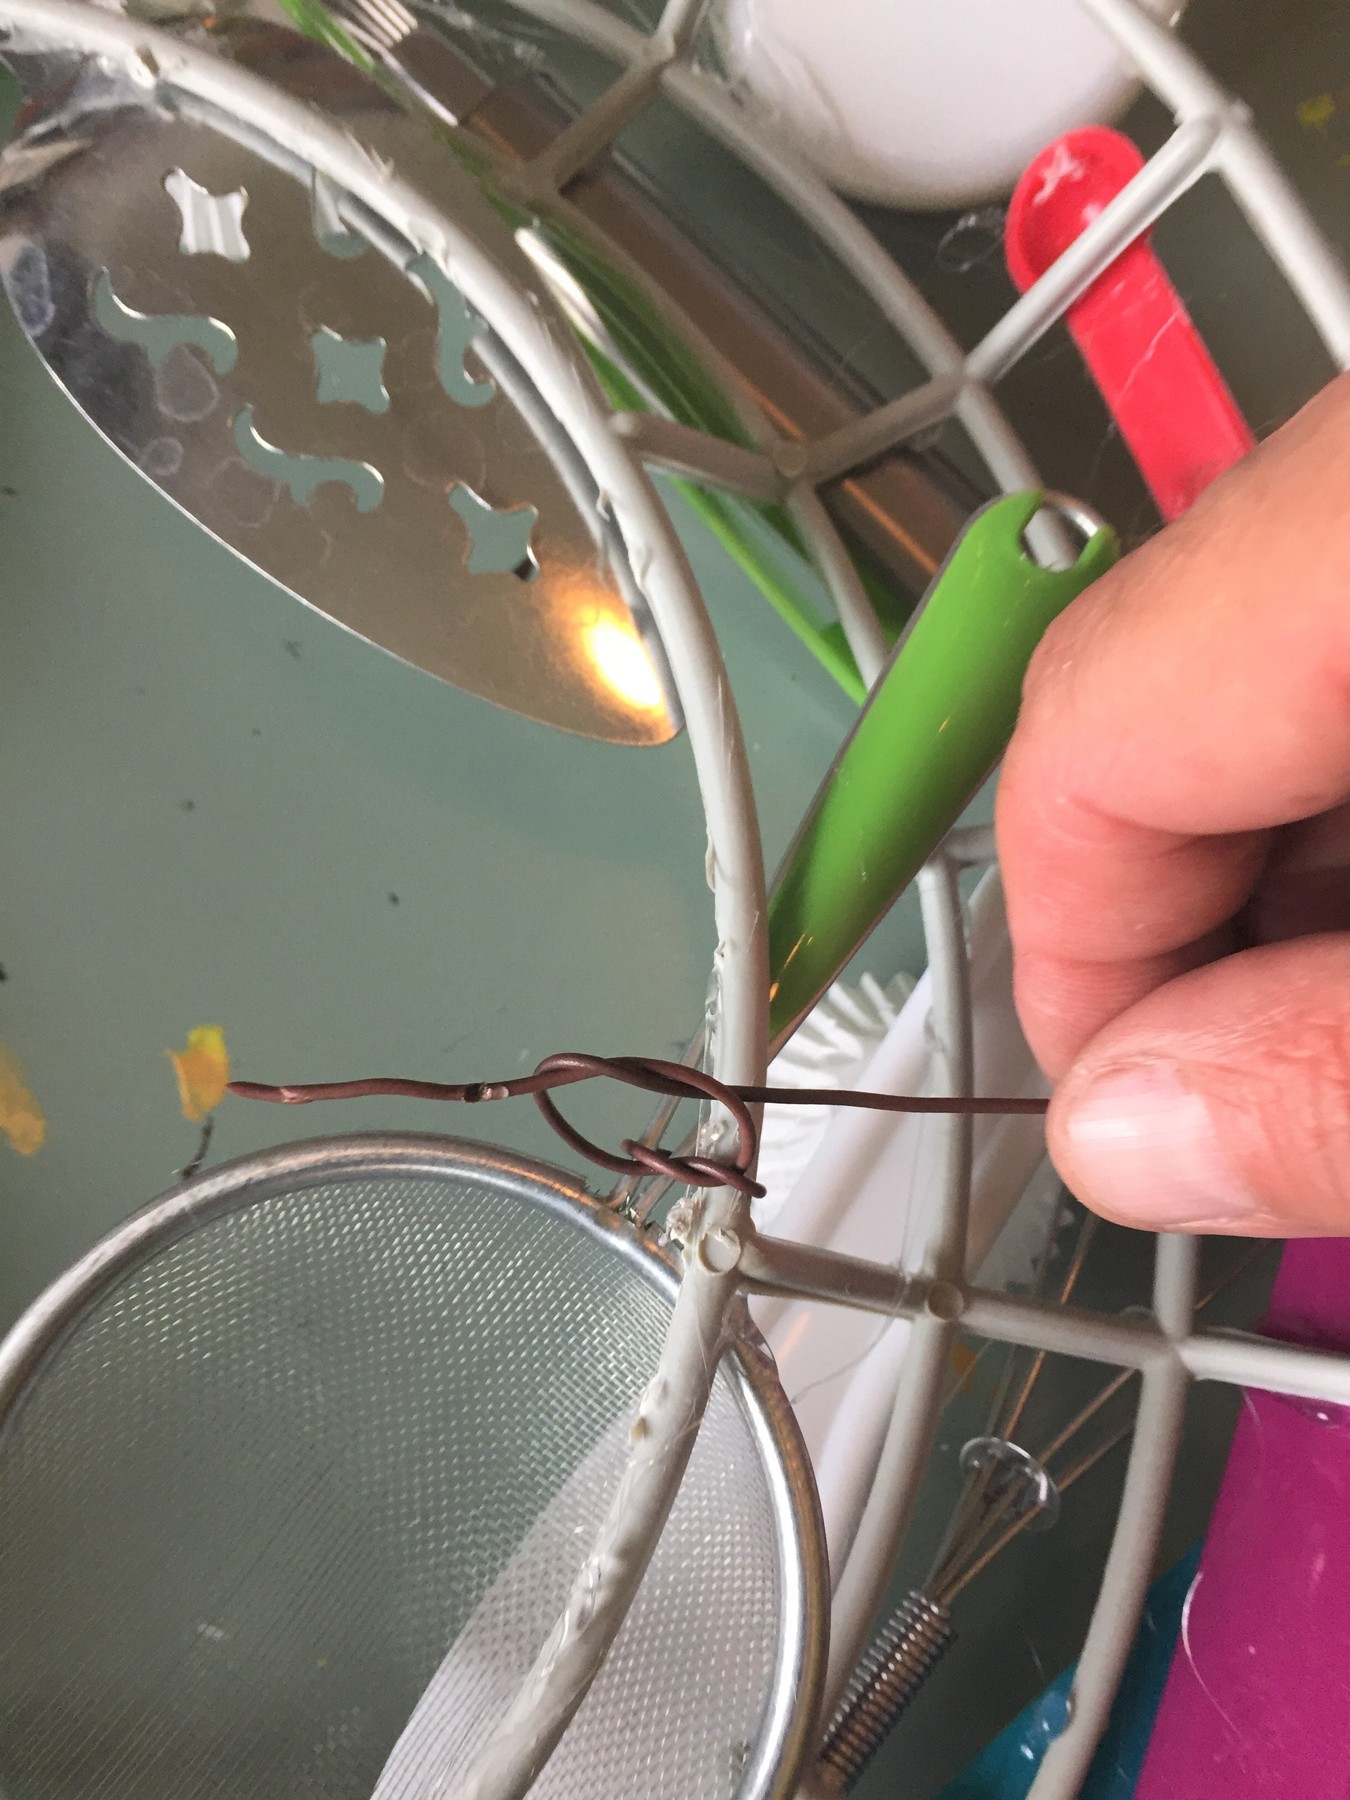 Tim uses wire to stabilize larger utensils.